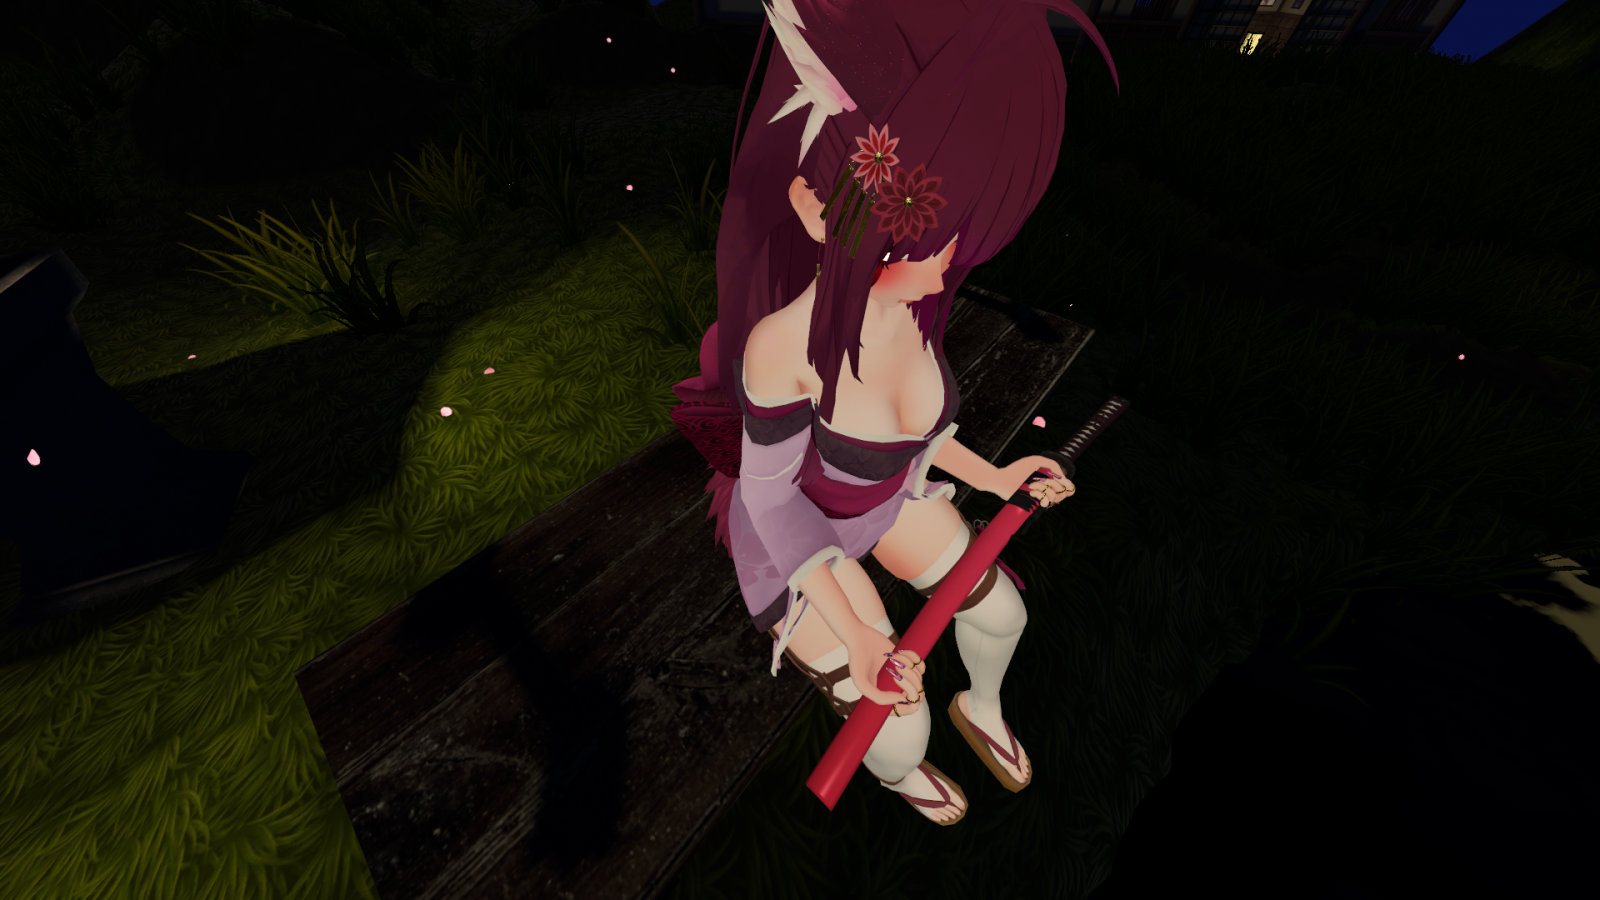 VRChat_1920x1080_2022-03-29_03-20-46.720.png